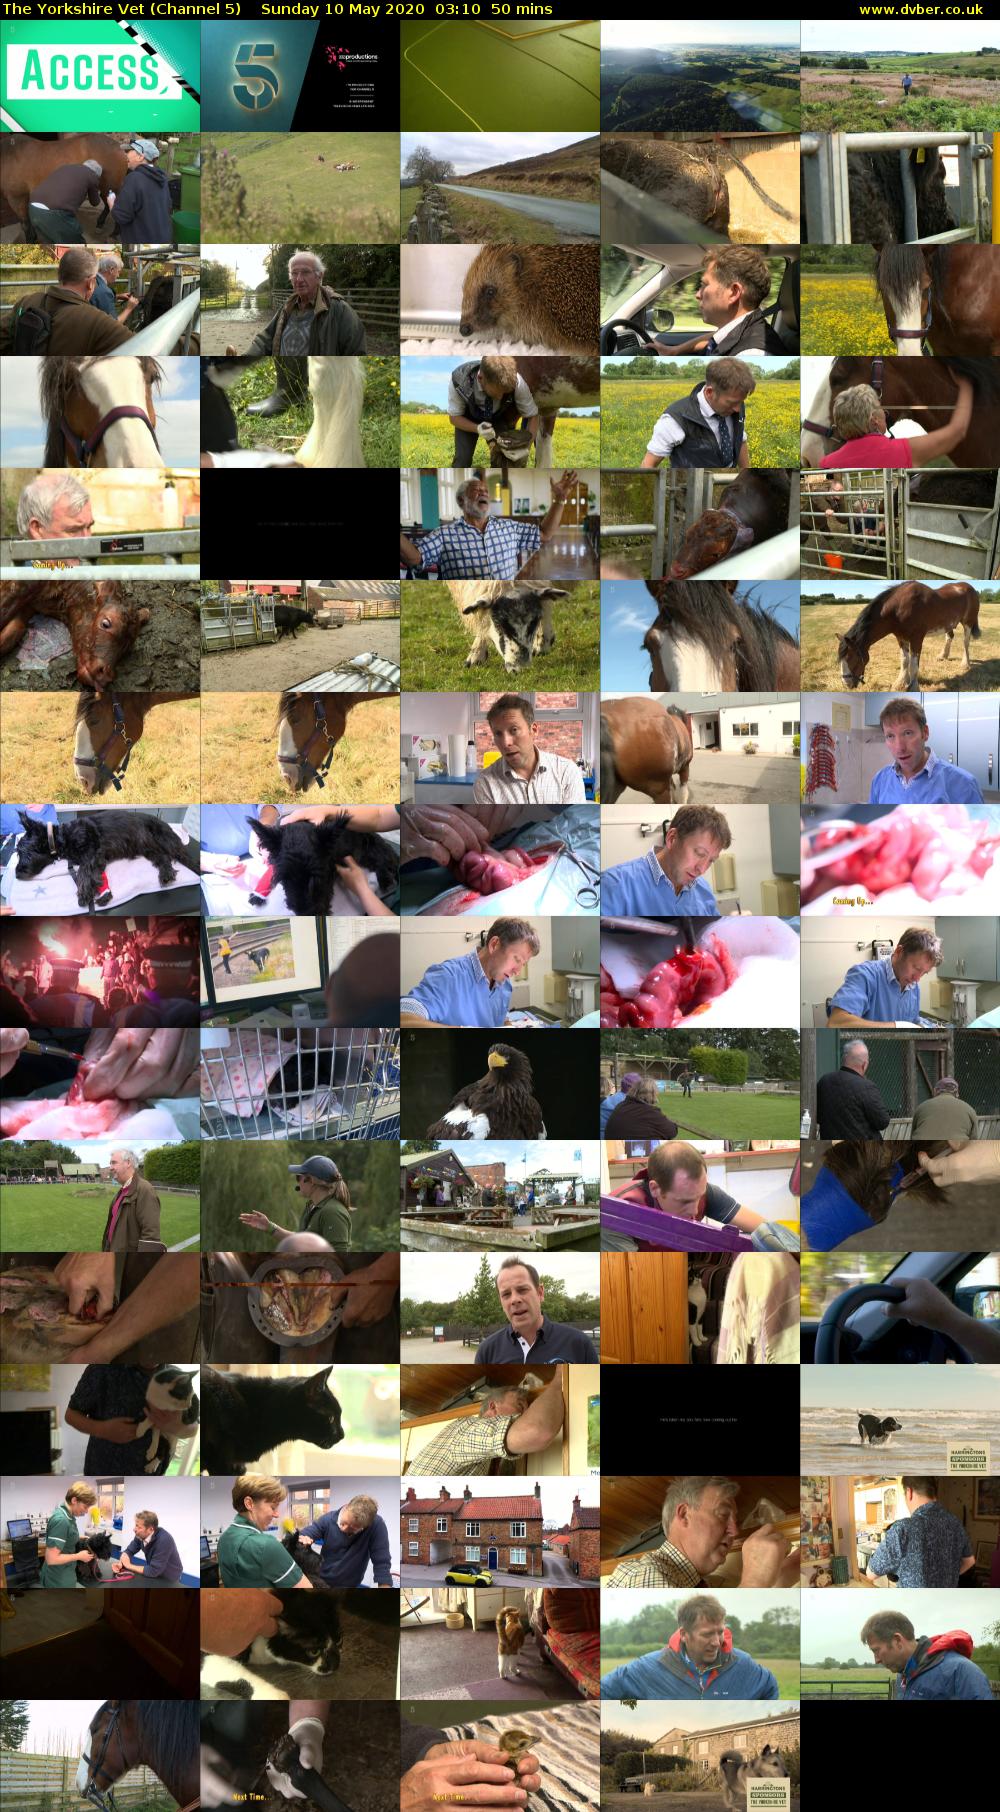 The Yorkshire Vet (Channel 5) Sunday 10 May 2020 03:10 - 04:00